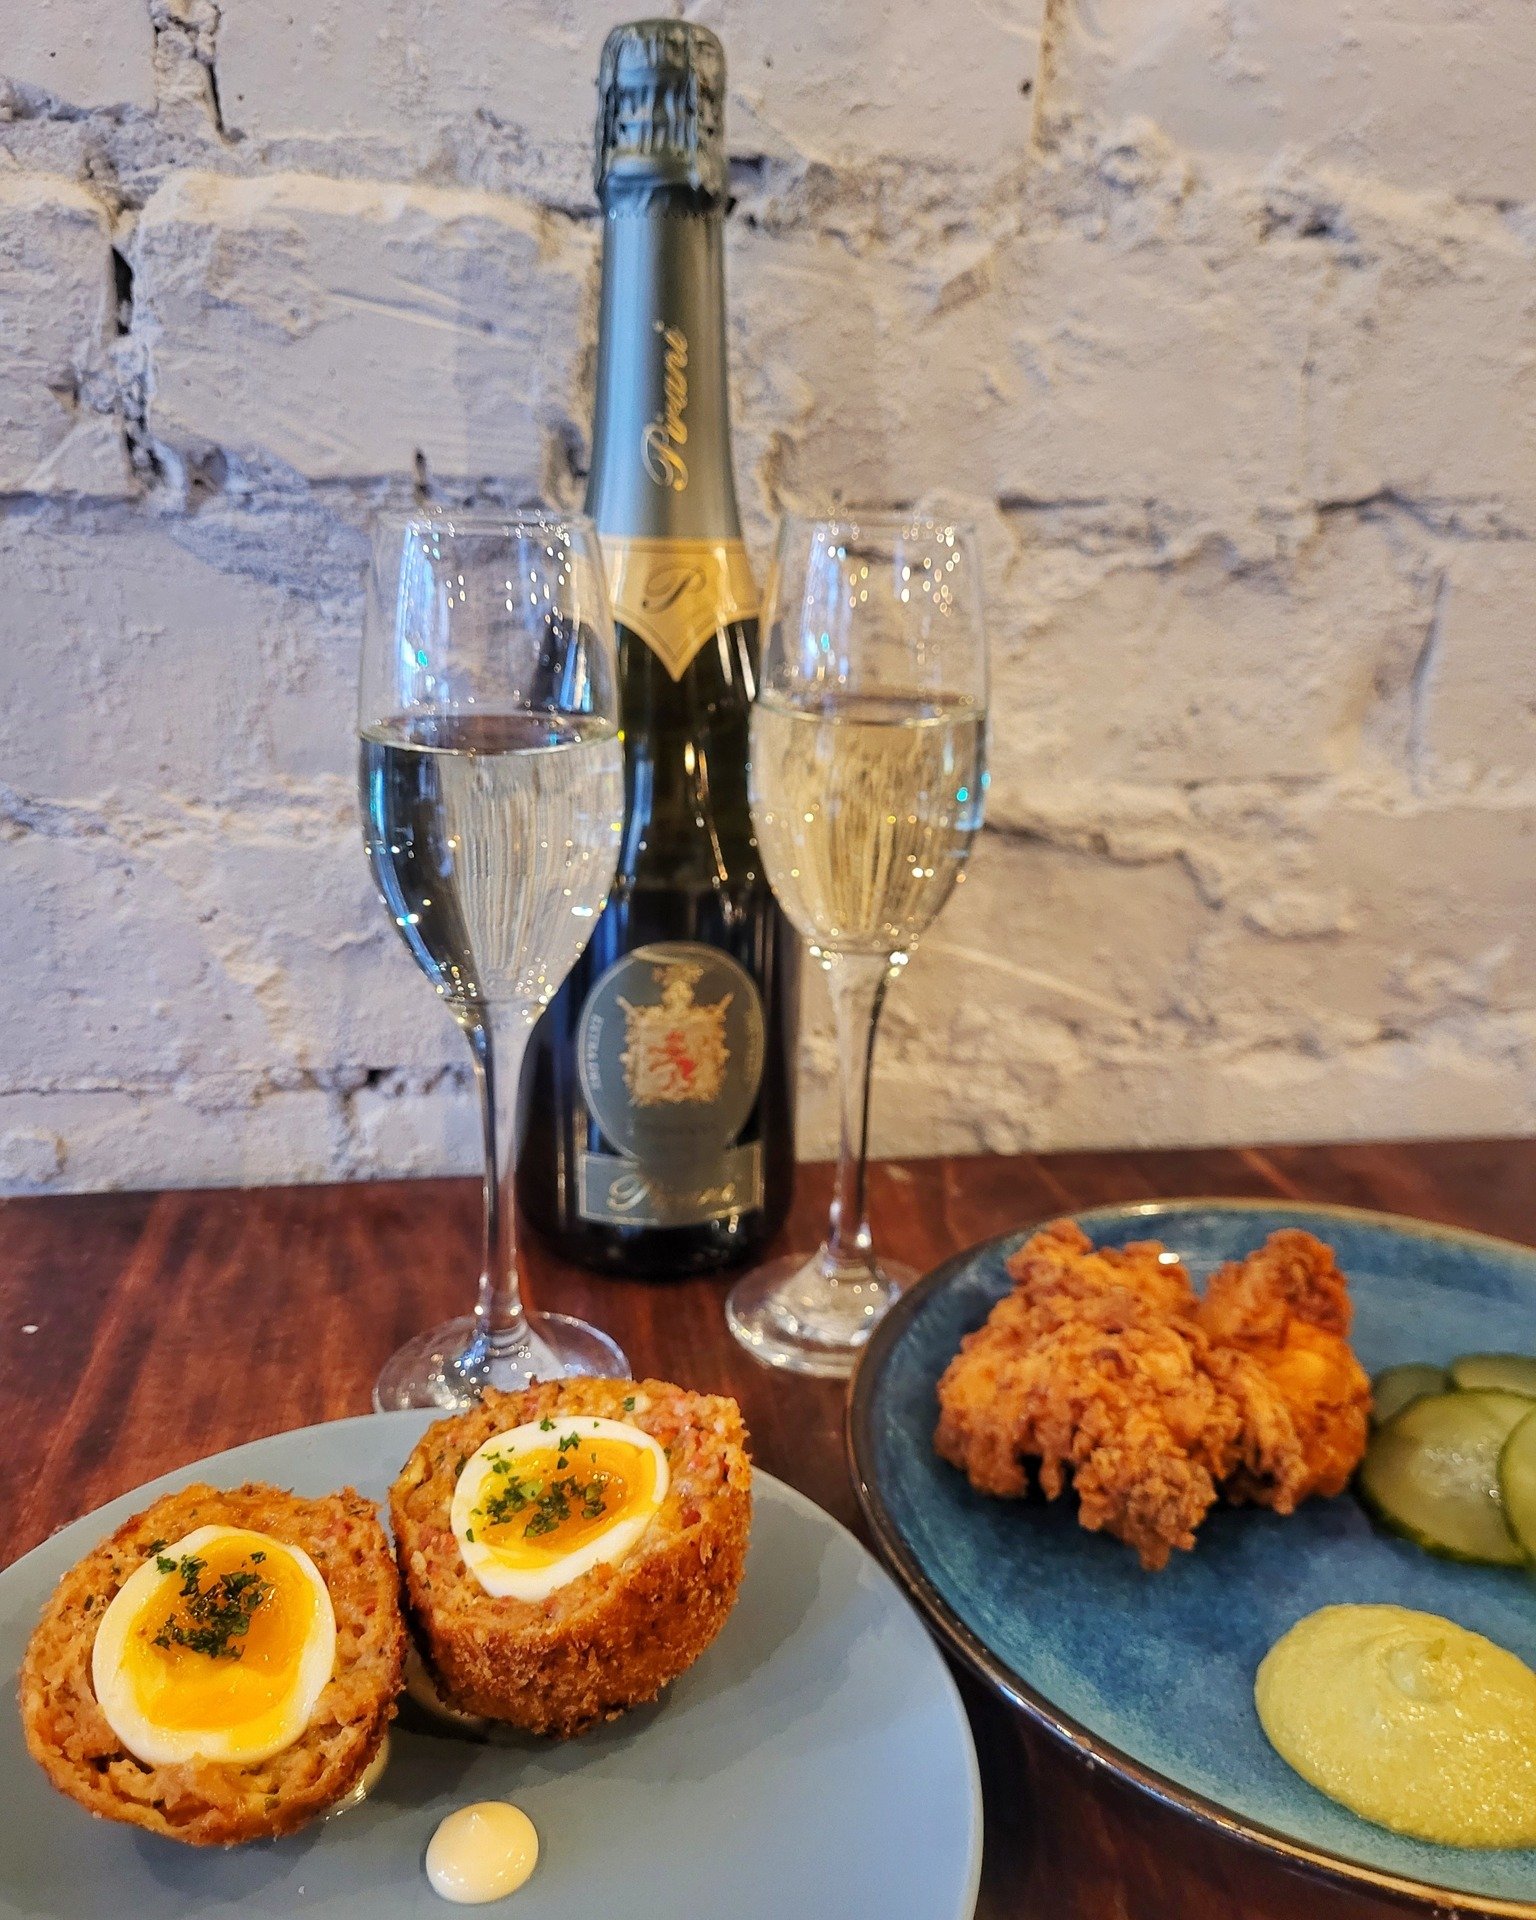 It is Saturday tomorrow, no plans yet? Why not book a table for Bottomless Brunch here at 176?
We offer and exceptionally high quality bottomless brunch at the most affordable price you will find in town.
2 dishes and unlimited drinks for &pound;27.5